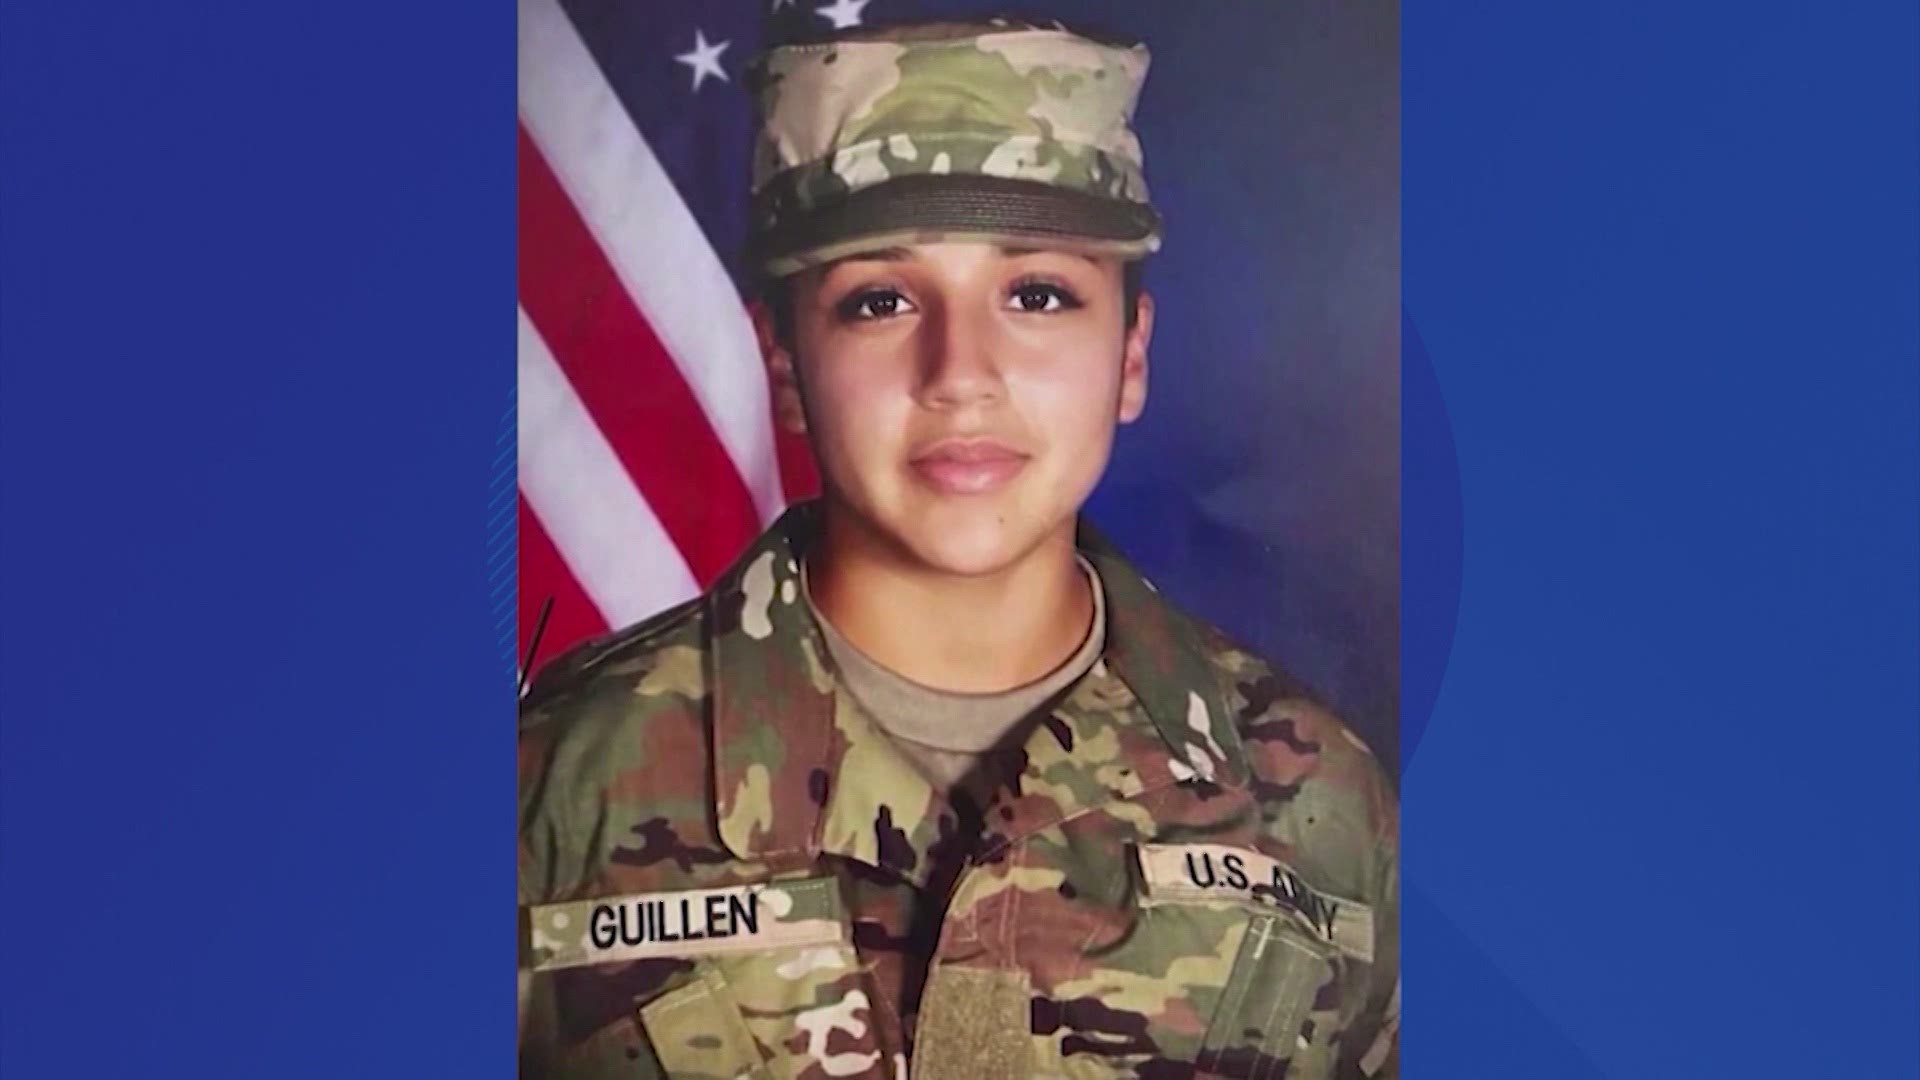 Fort Hood soldier Vanessa Guillen disappeared and was killed on April 22, 2020